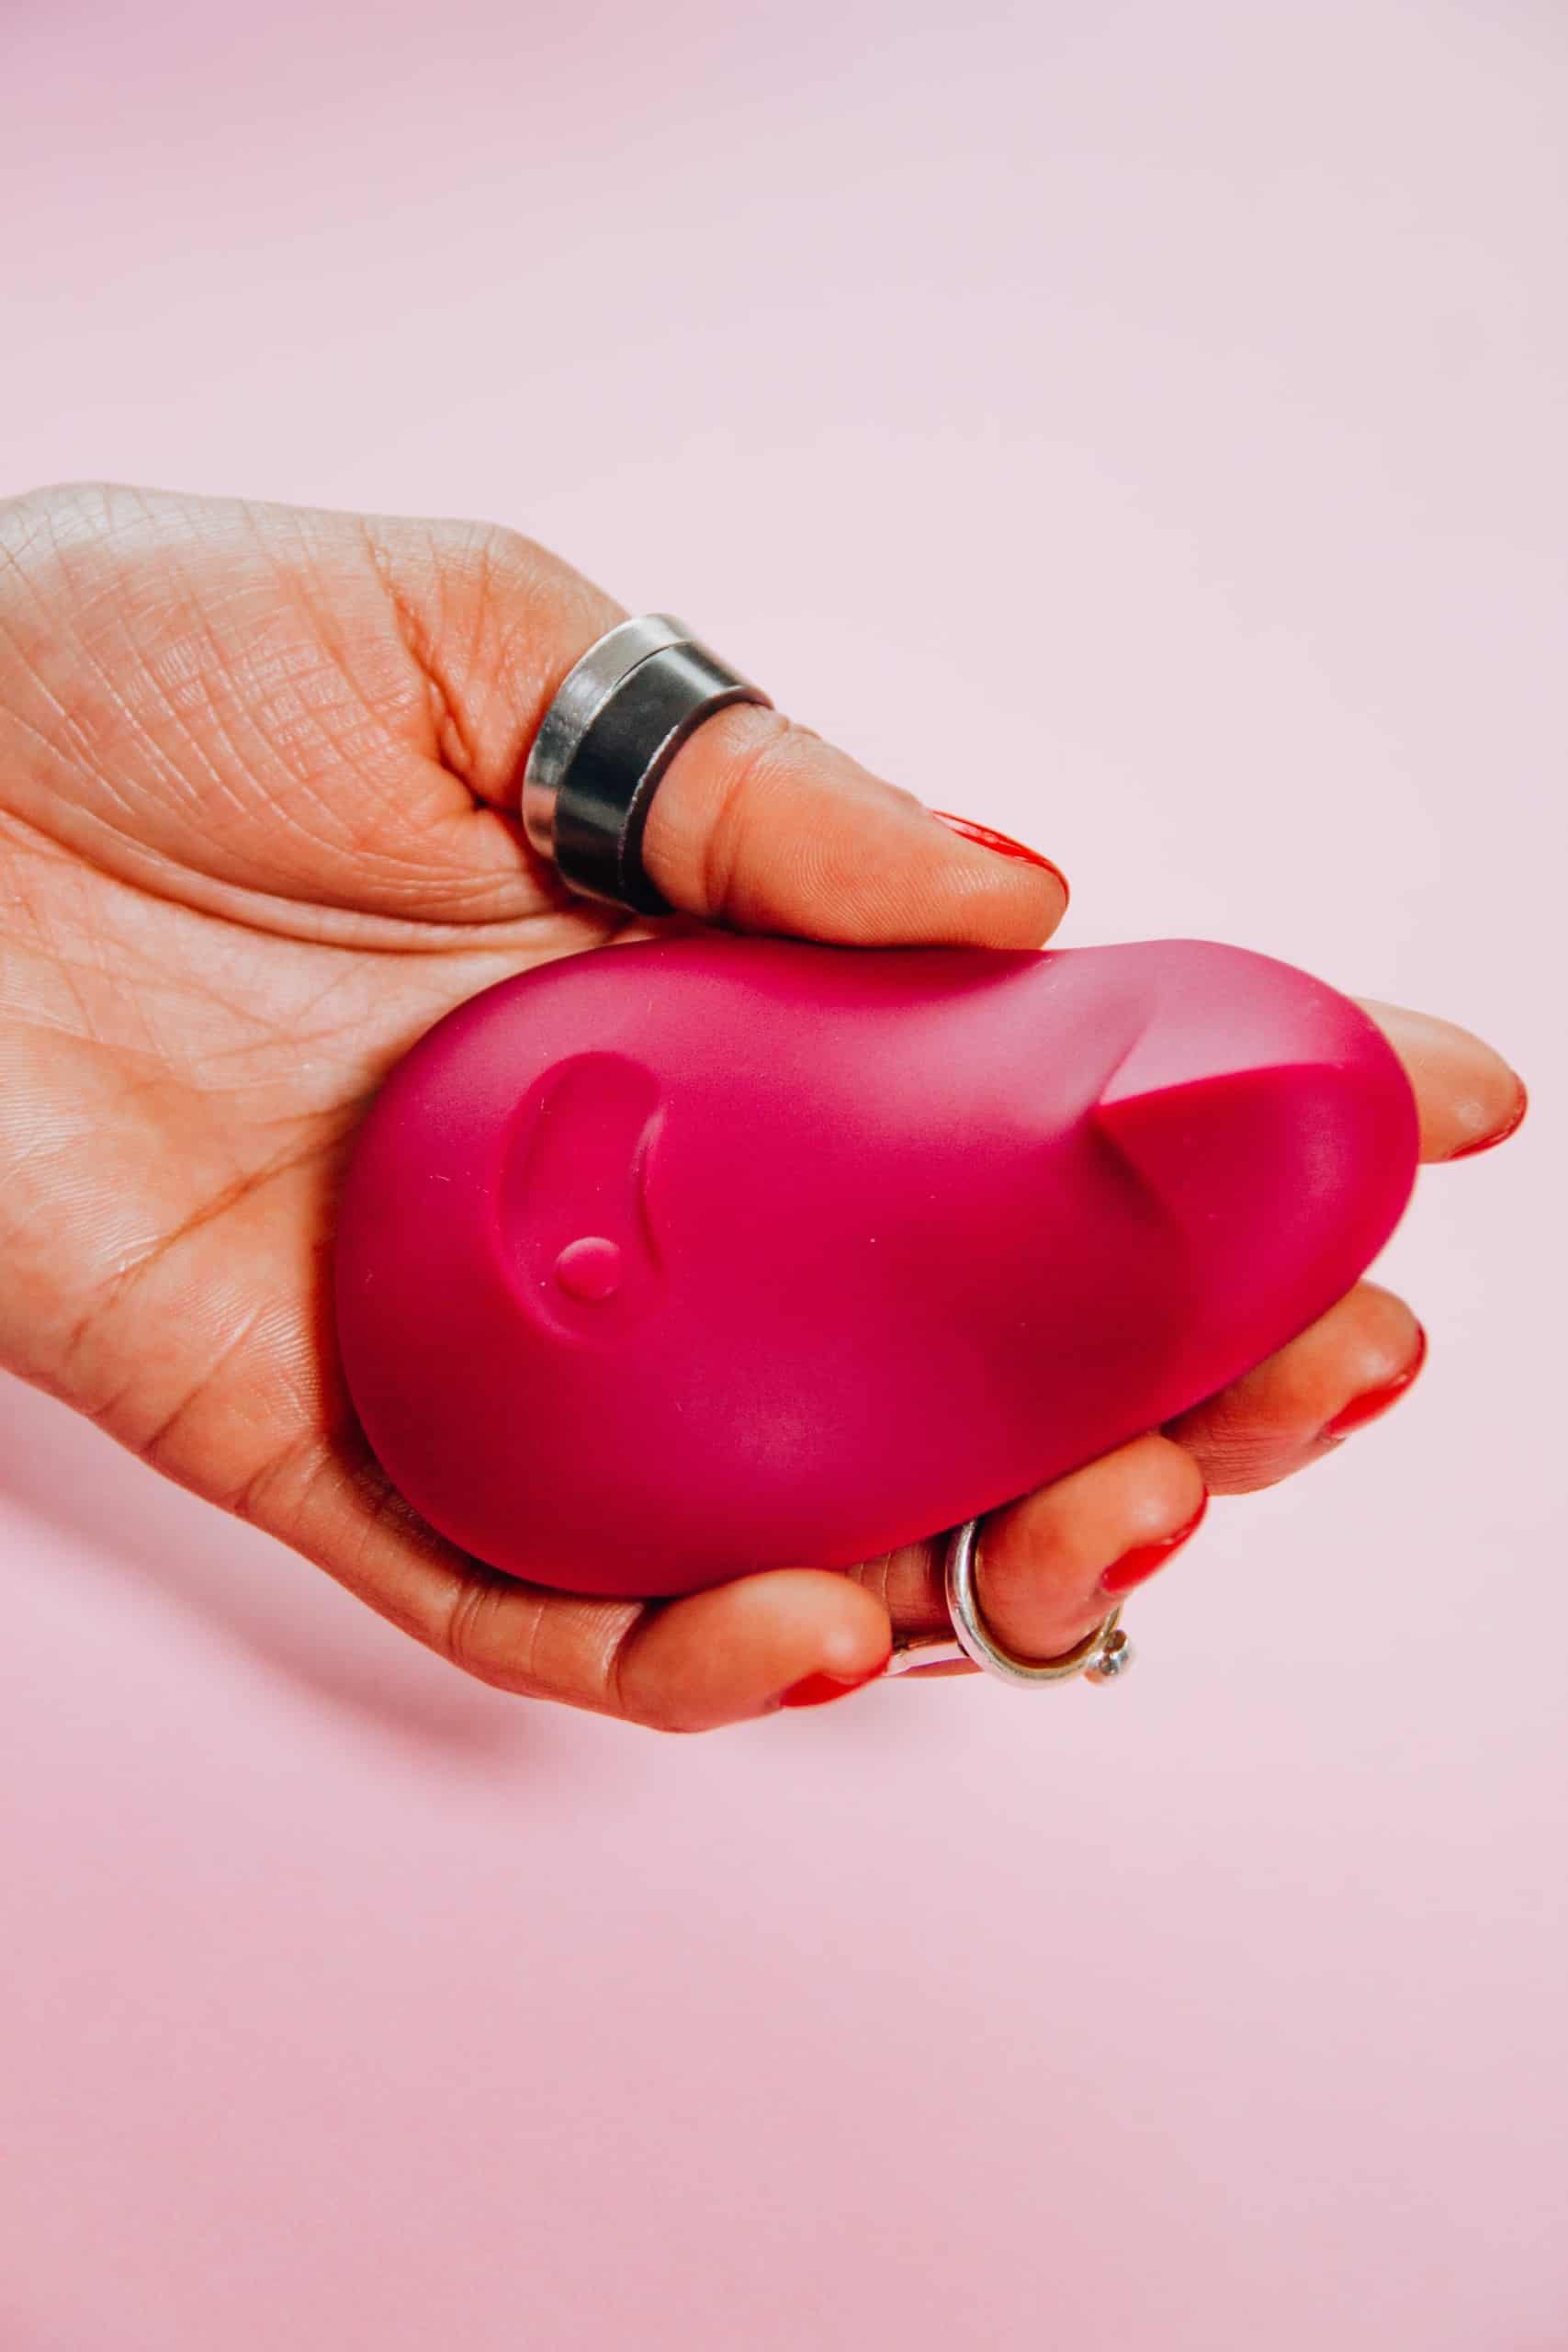 The Best Sexual Toys for Women to Satisfy Any Craving